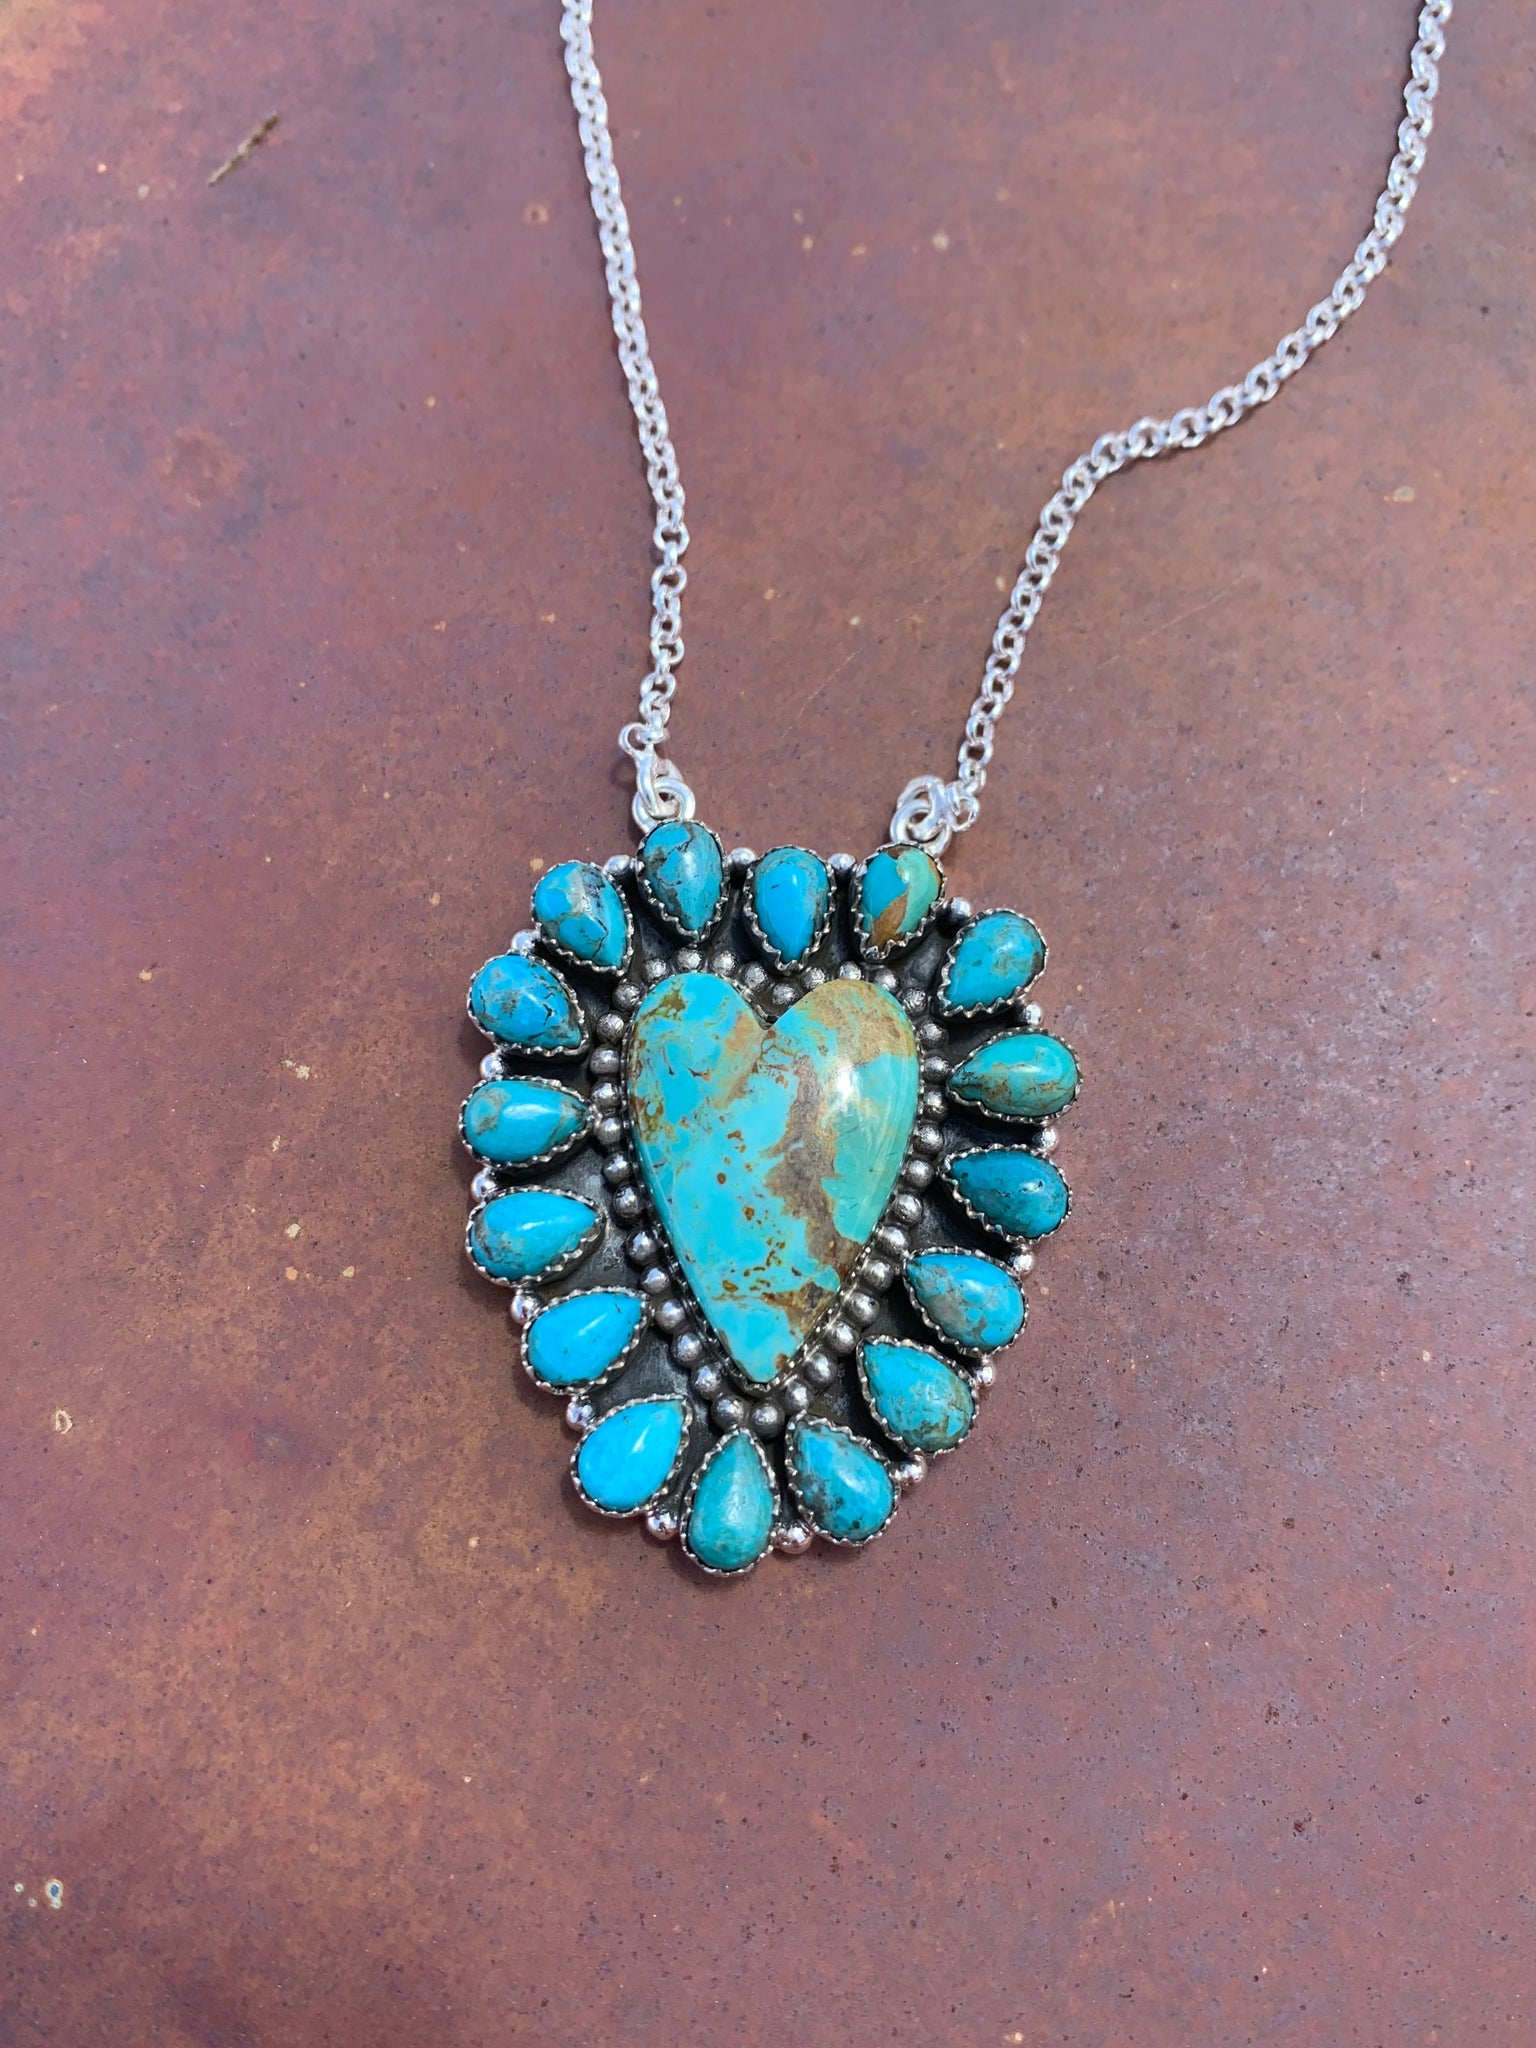 Heart of Turquoise Cluster necklace